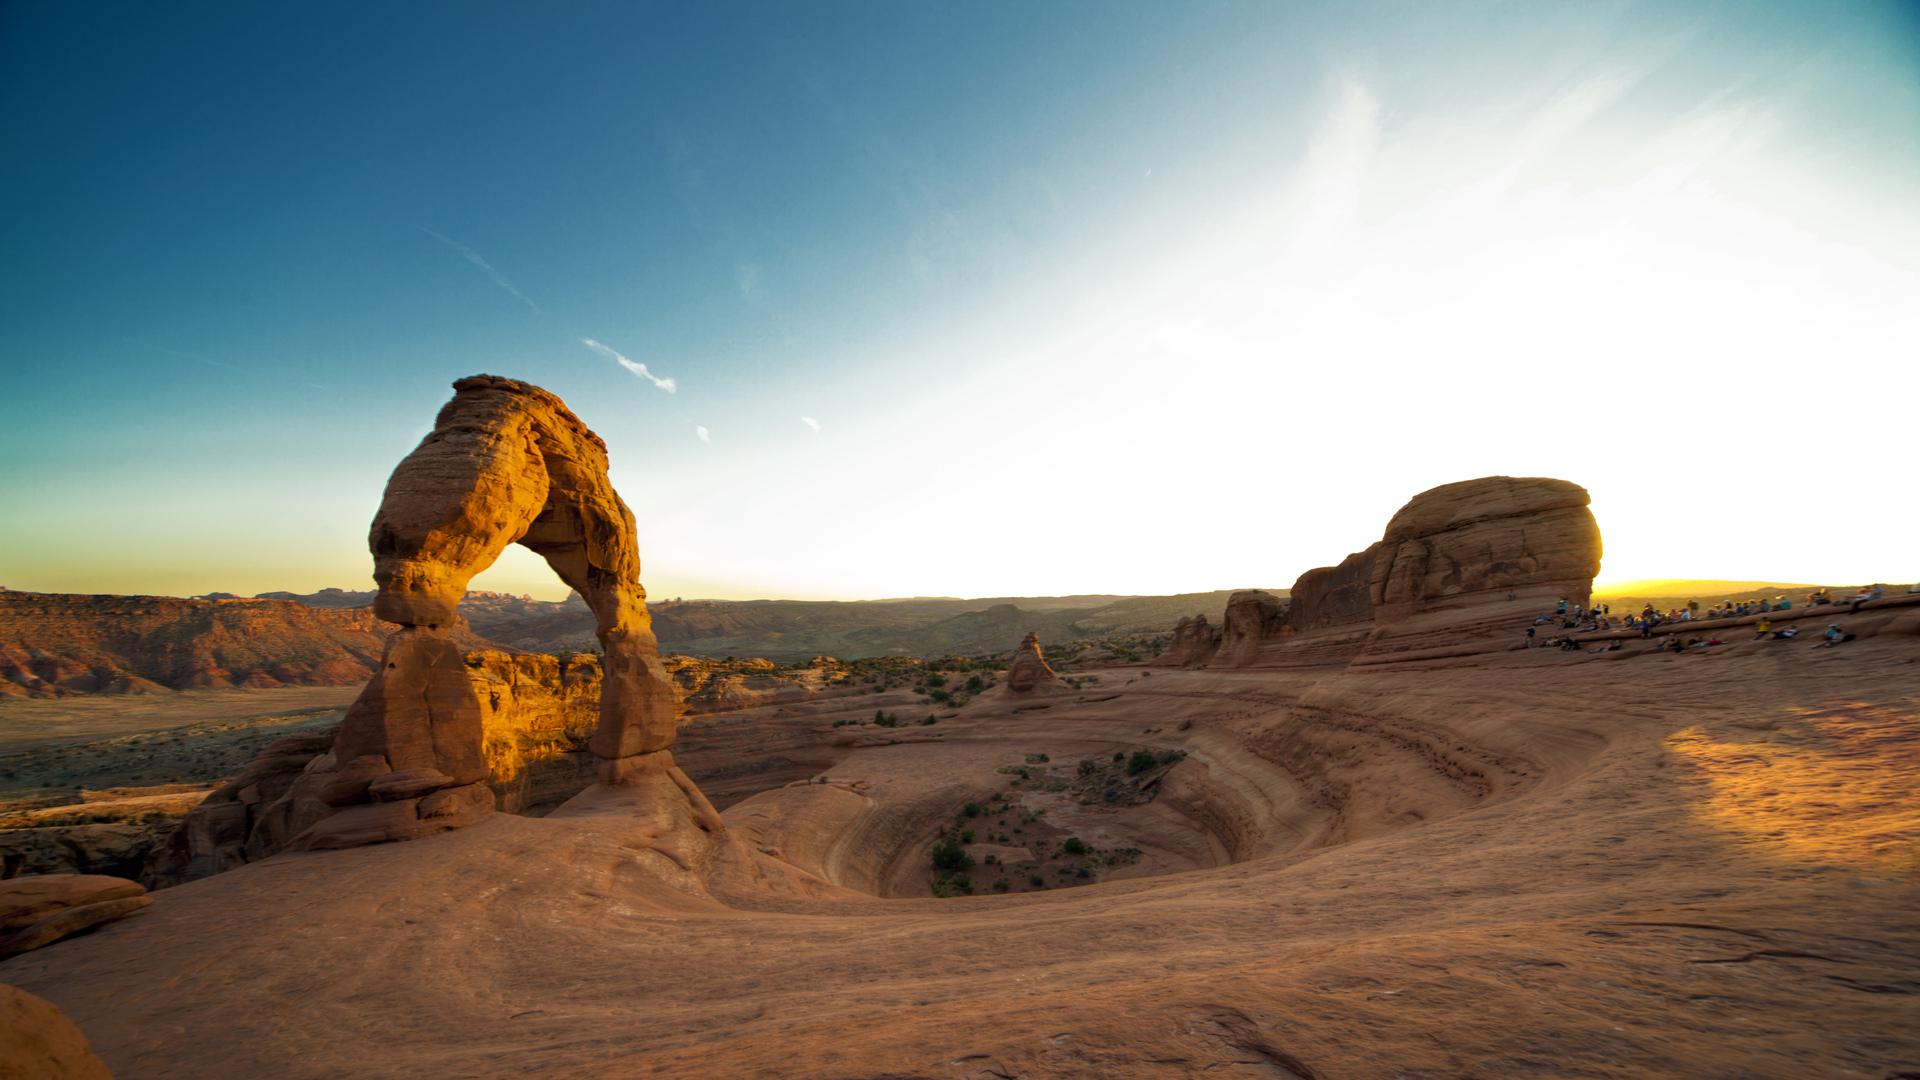 Delicate arch in arches national park utah - (#152272) - High ...